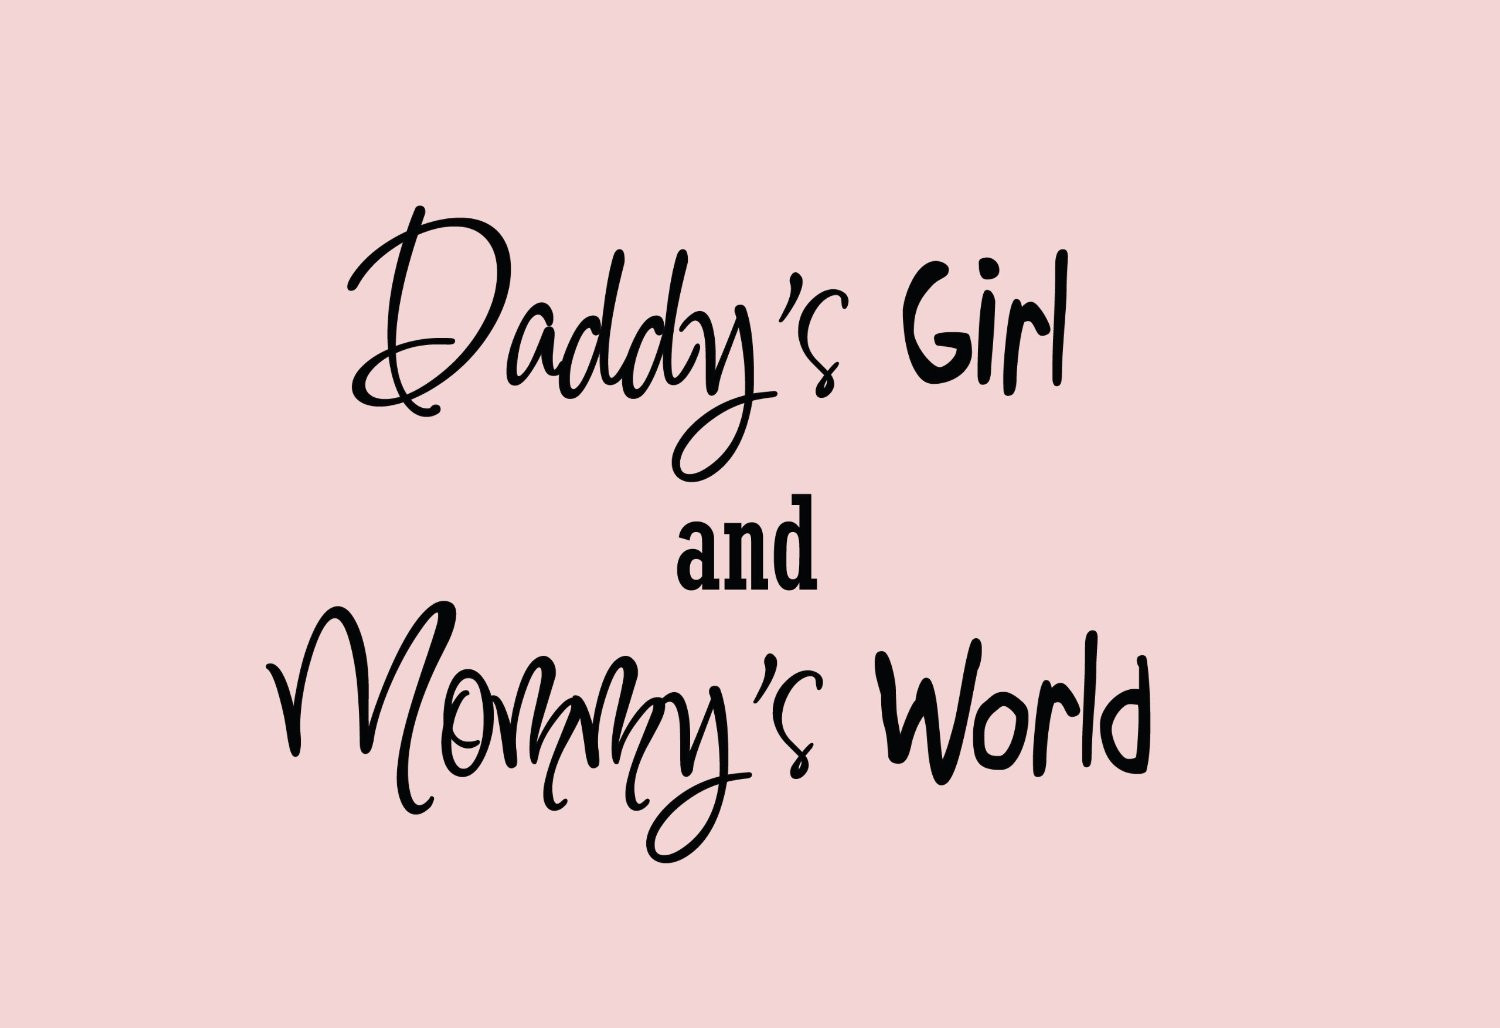 Love My Baby Daddy Quotes
 I Love My Baby Daddy Quotes And Sayings QuotesGram